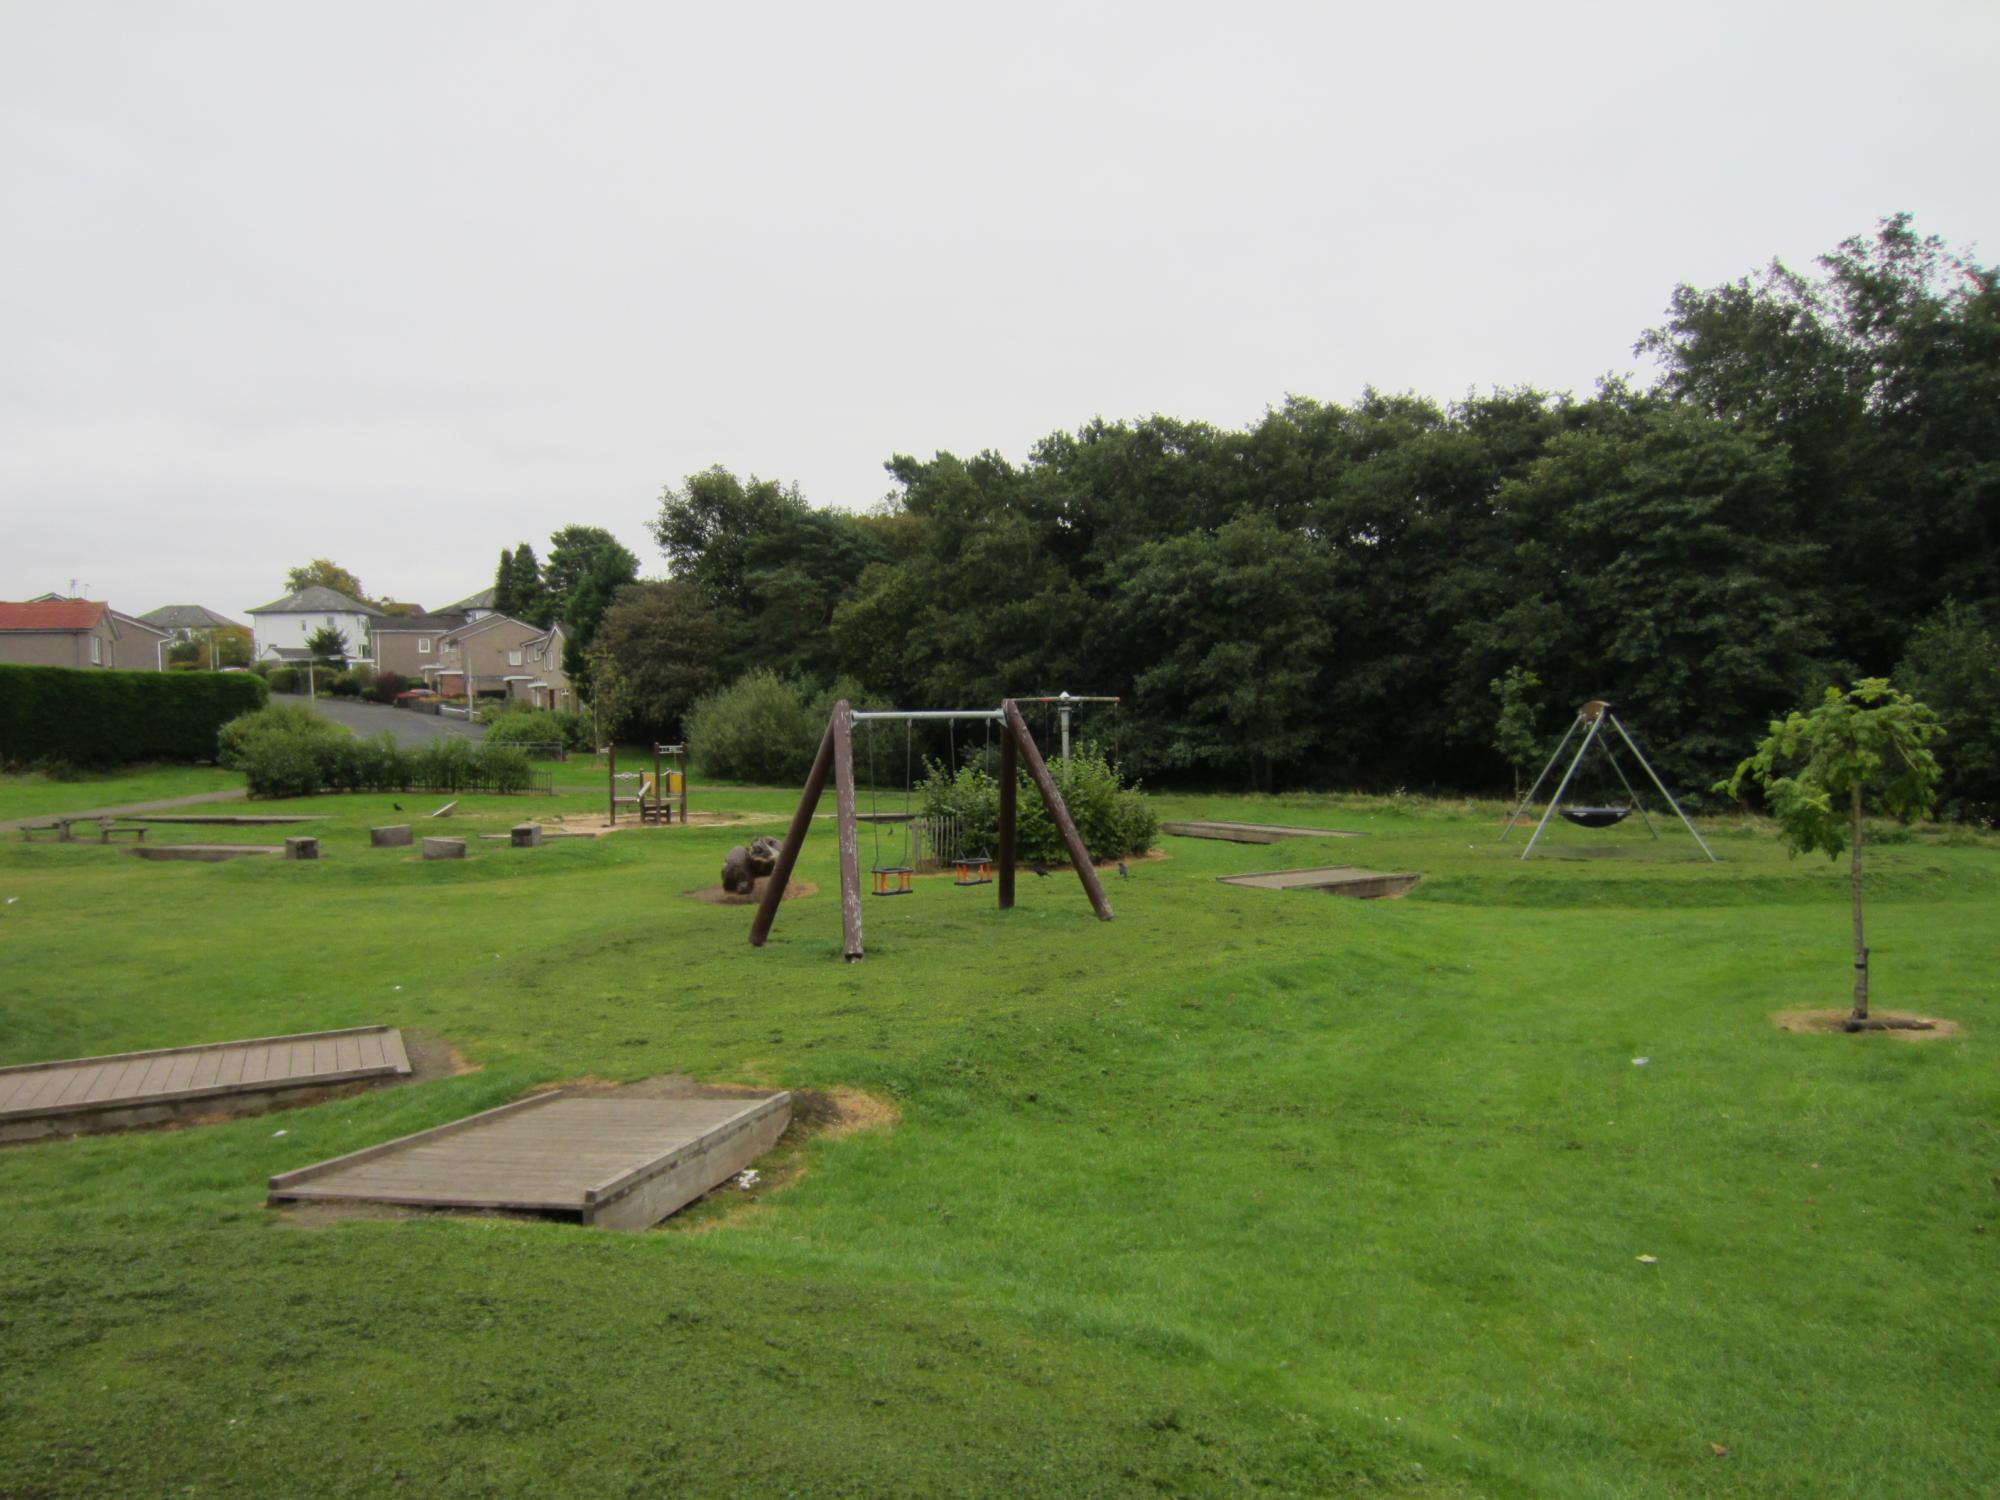 Mosshead Play Area - swing set and other playing equipment